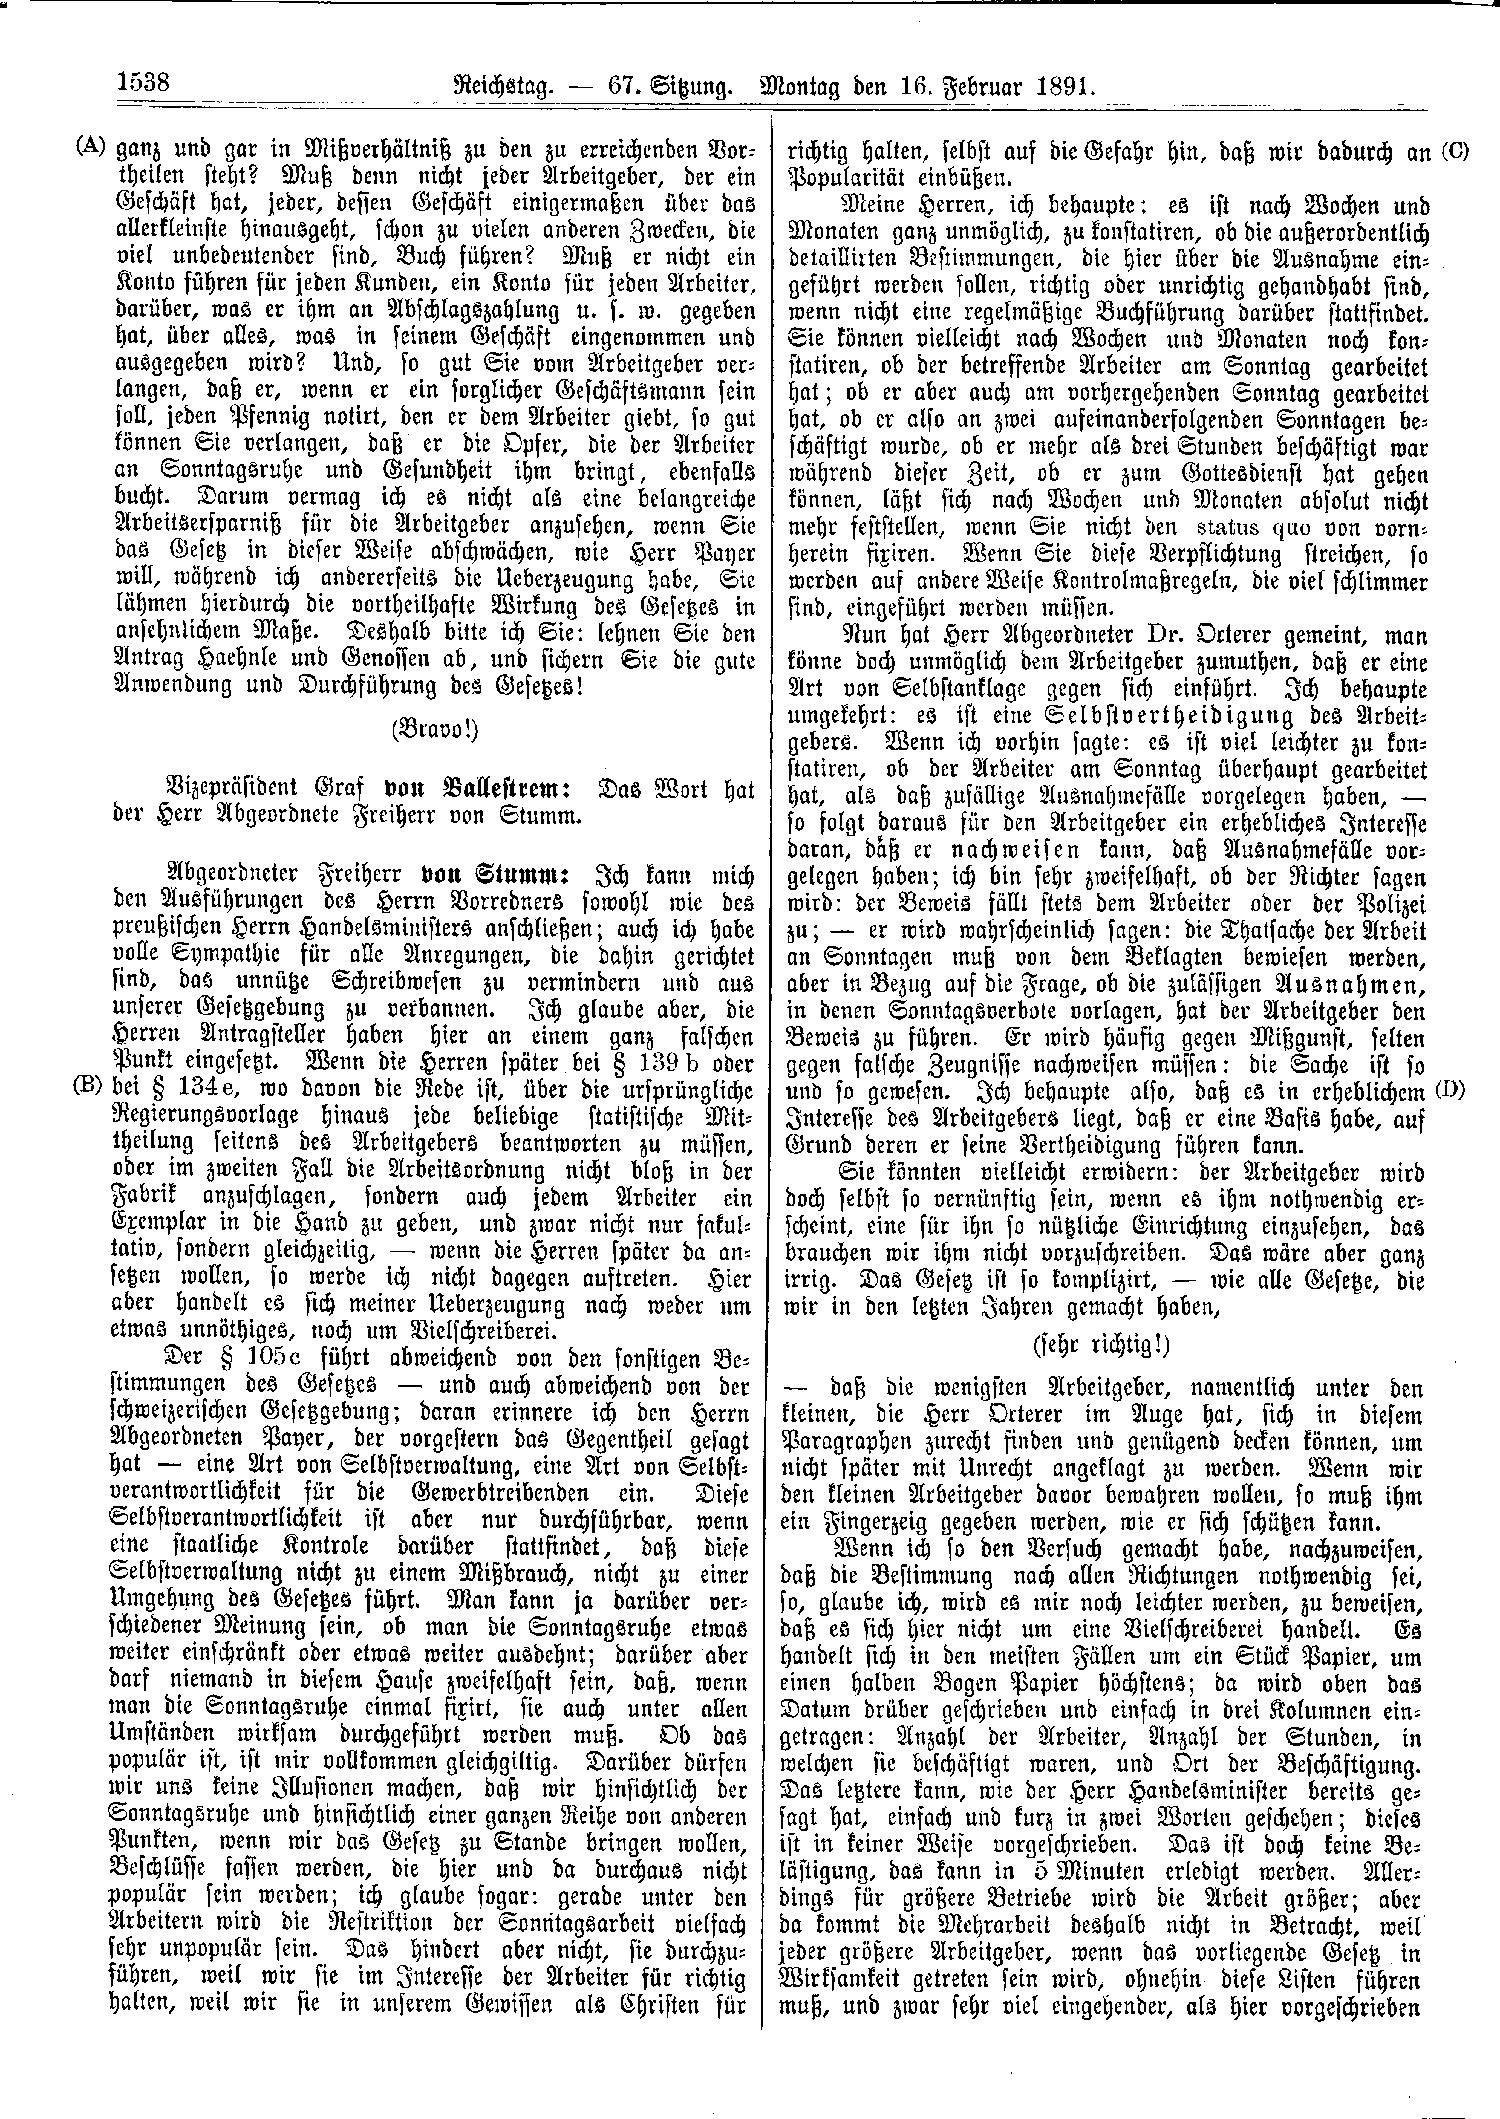 Scan of page 1538